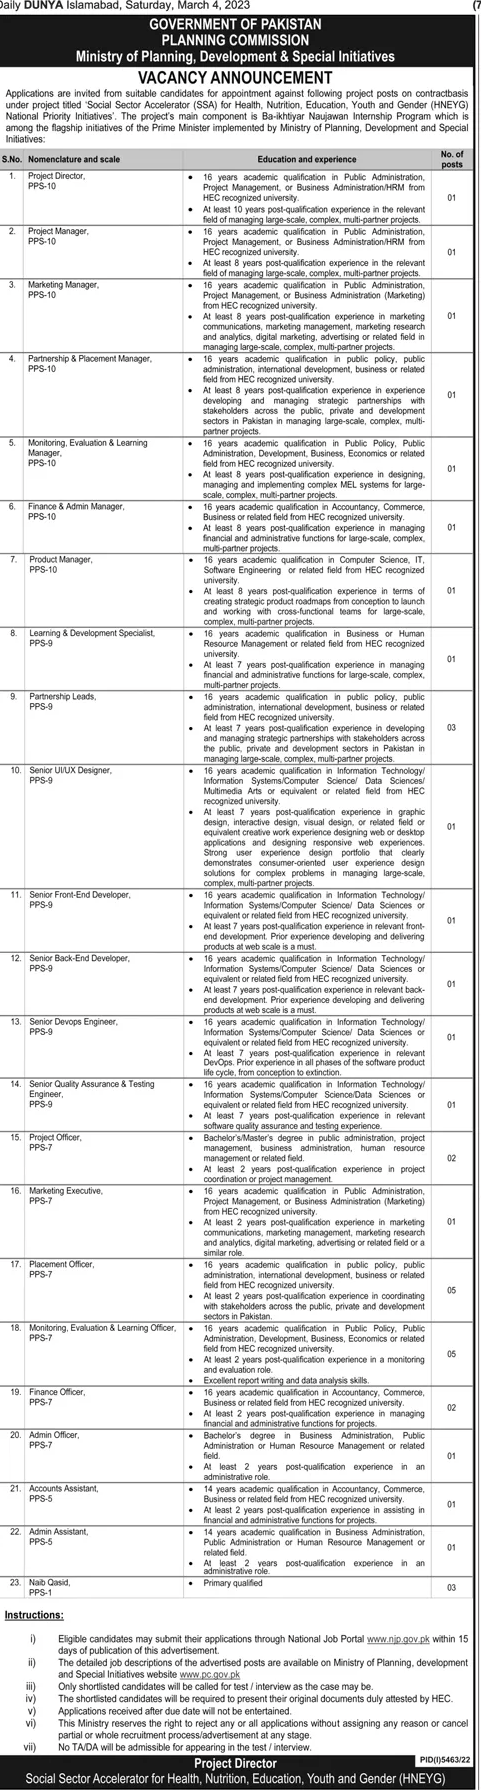 Govt Jobs in Planning Commission on Project Posts on Contract Basis